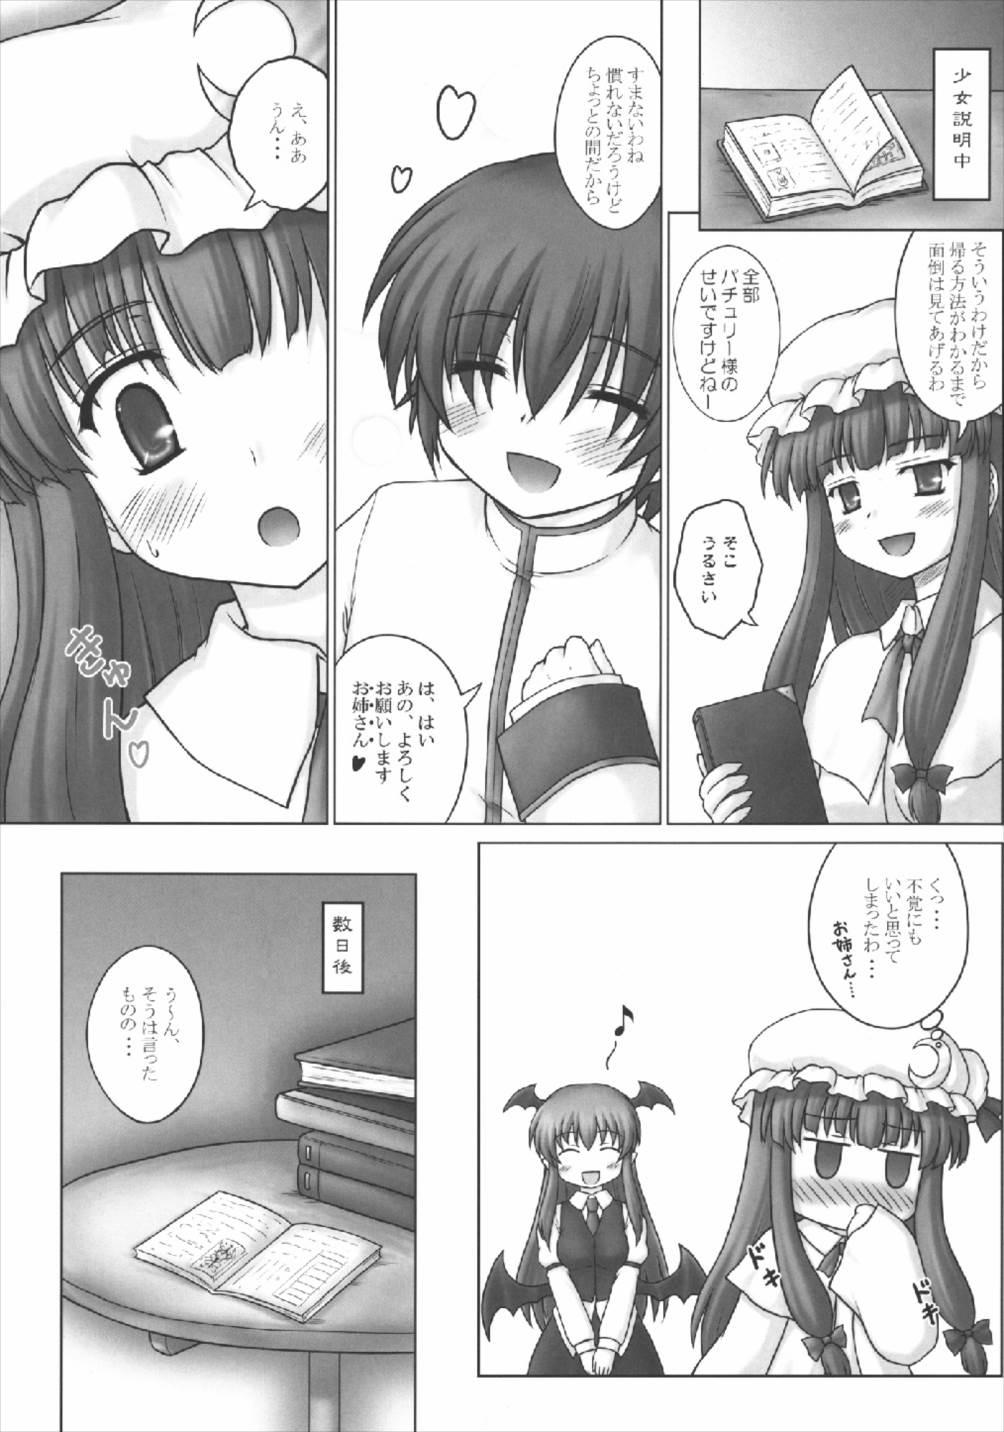 Interacial Onee-chan no East - Touhou project Crossdresser - Page 5